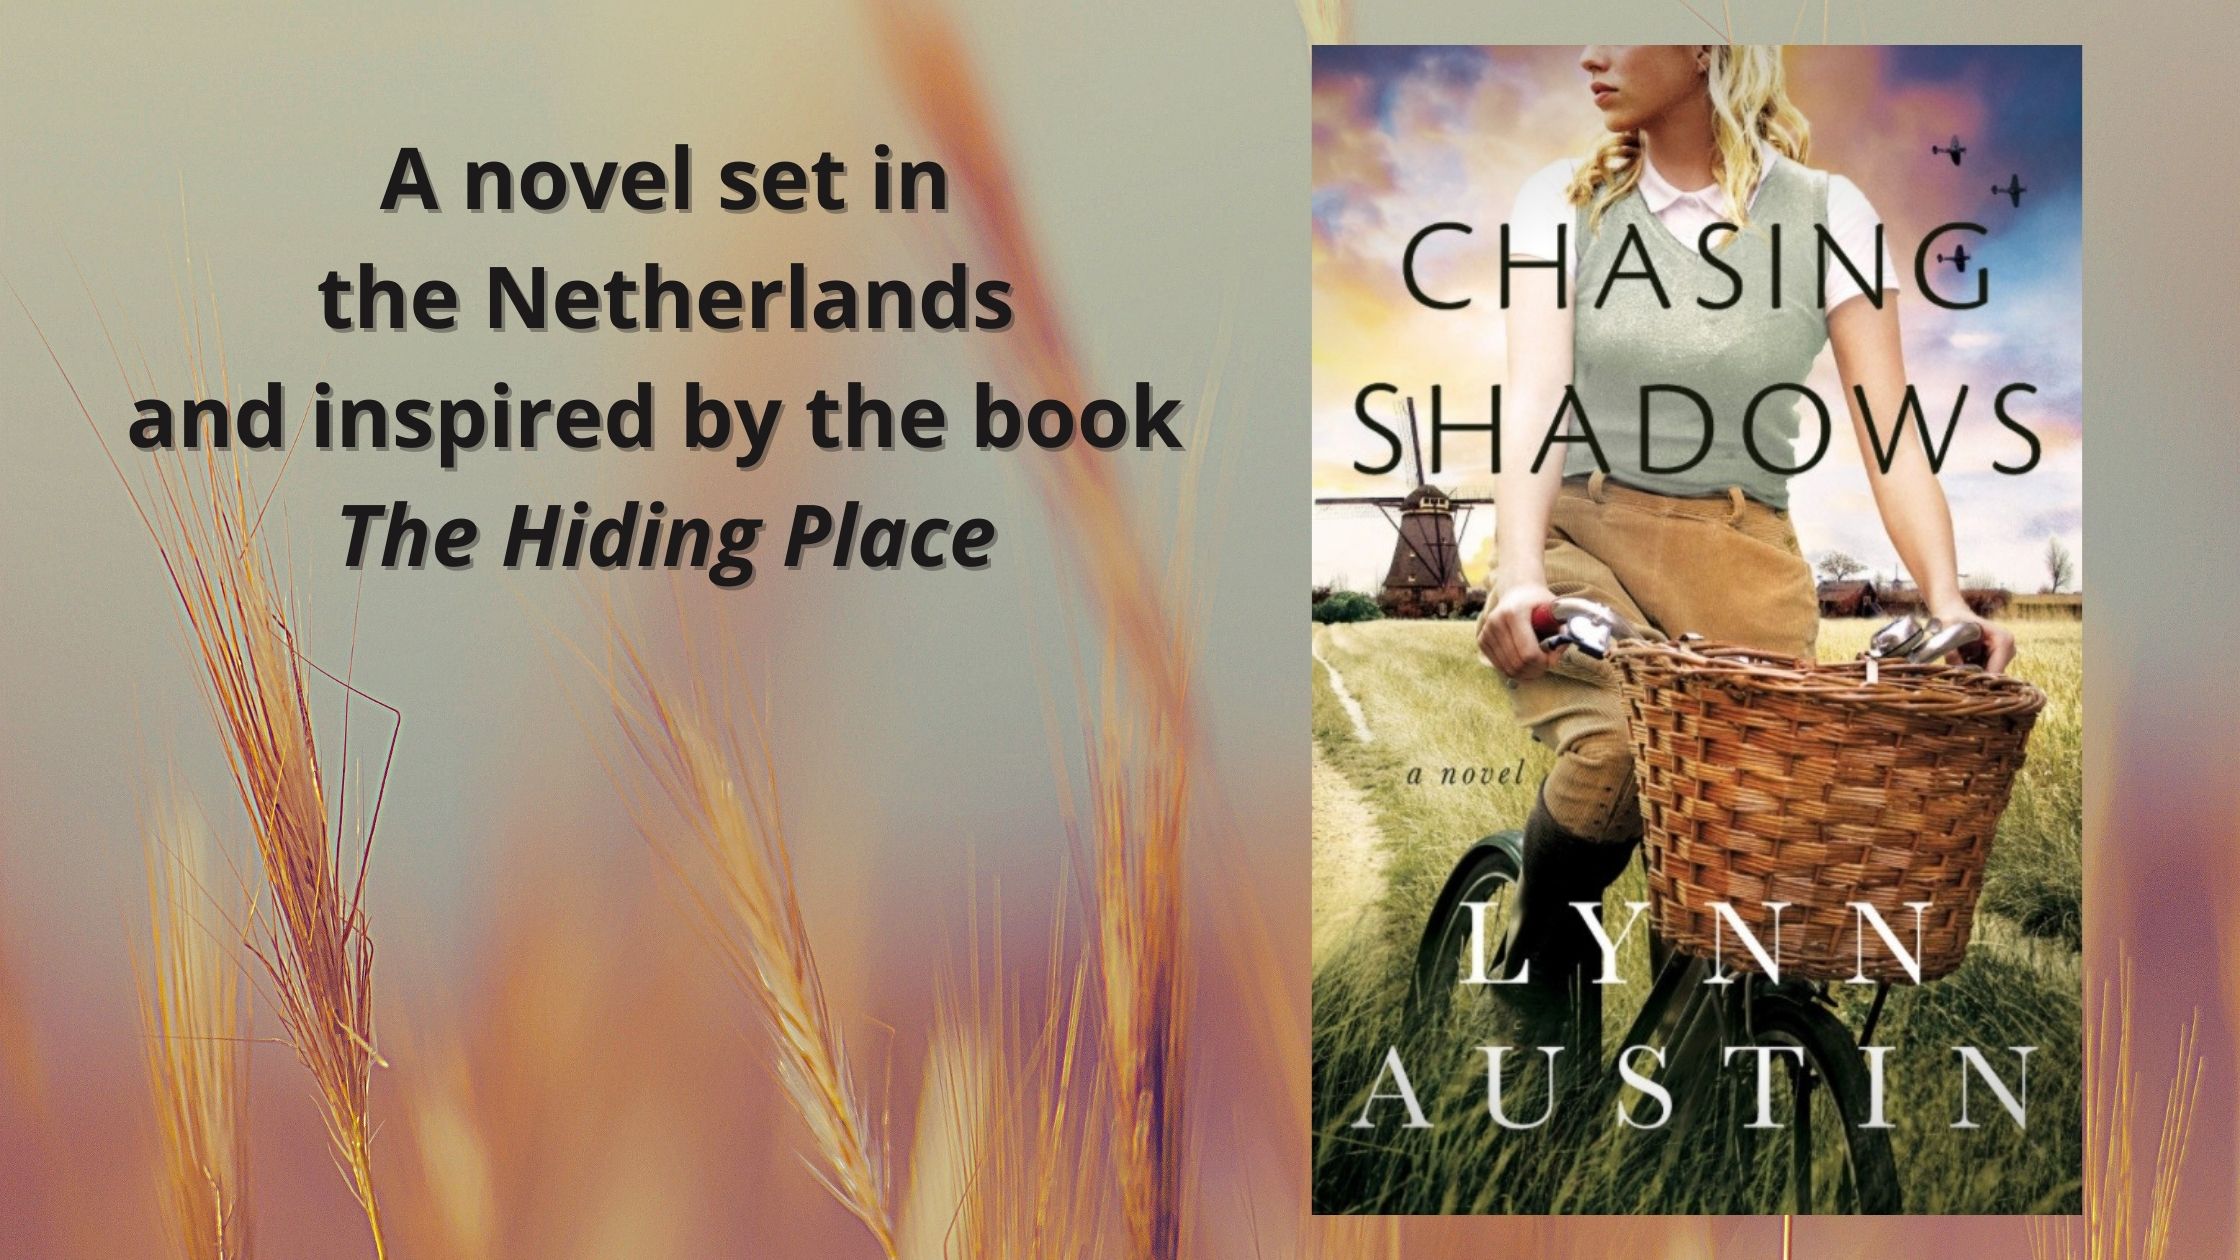 Chasing Shadows - a novel published by Tyndale House and released June 2021